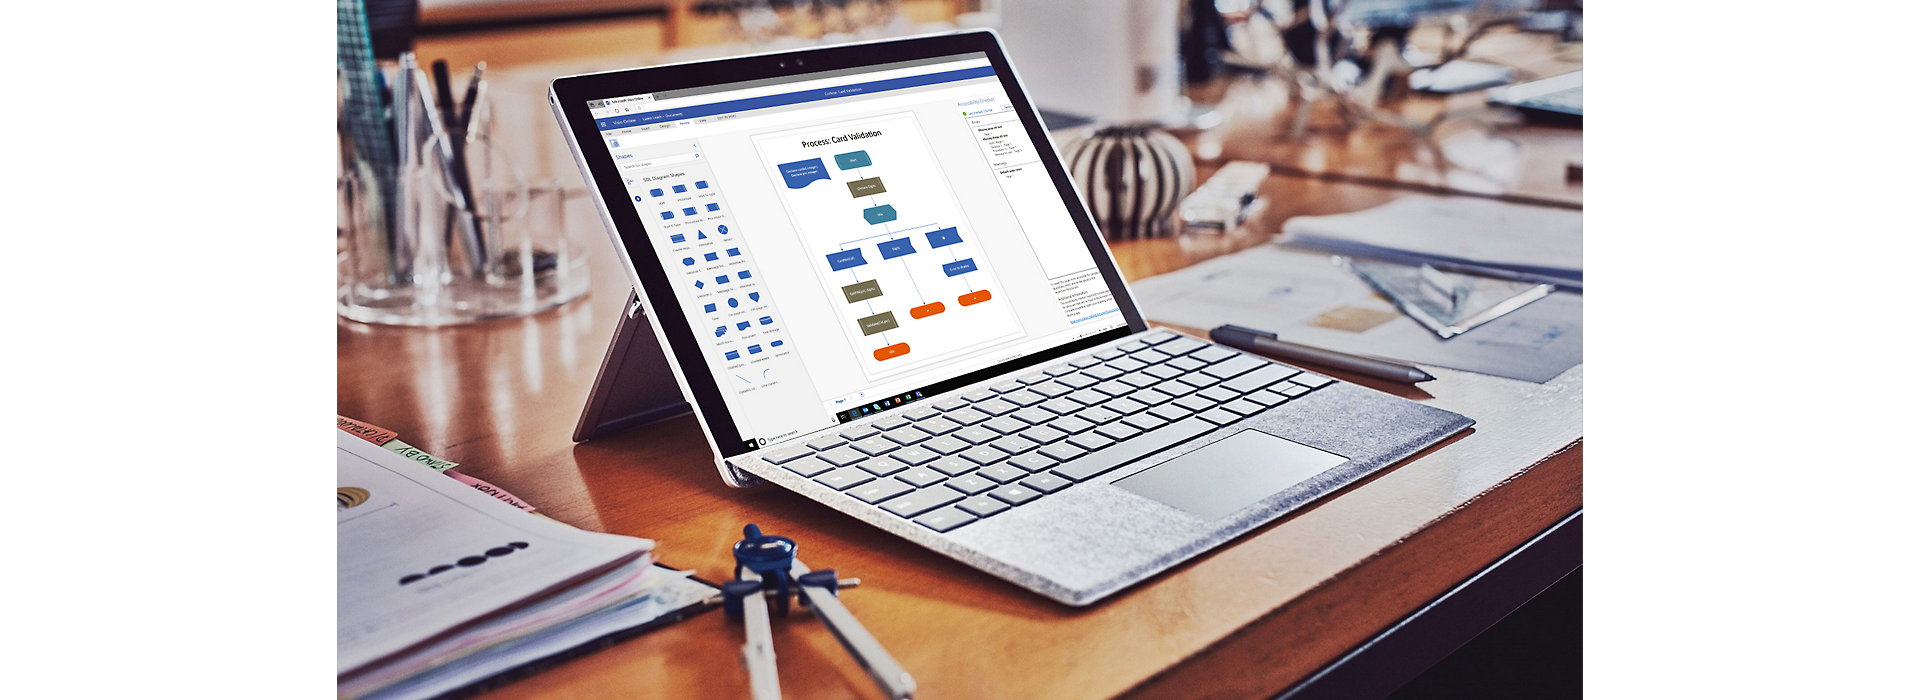 Process map displayed in Visio on a Surface laptop